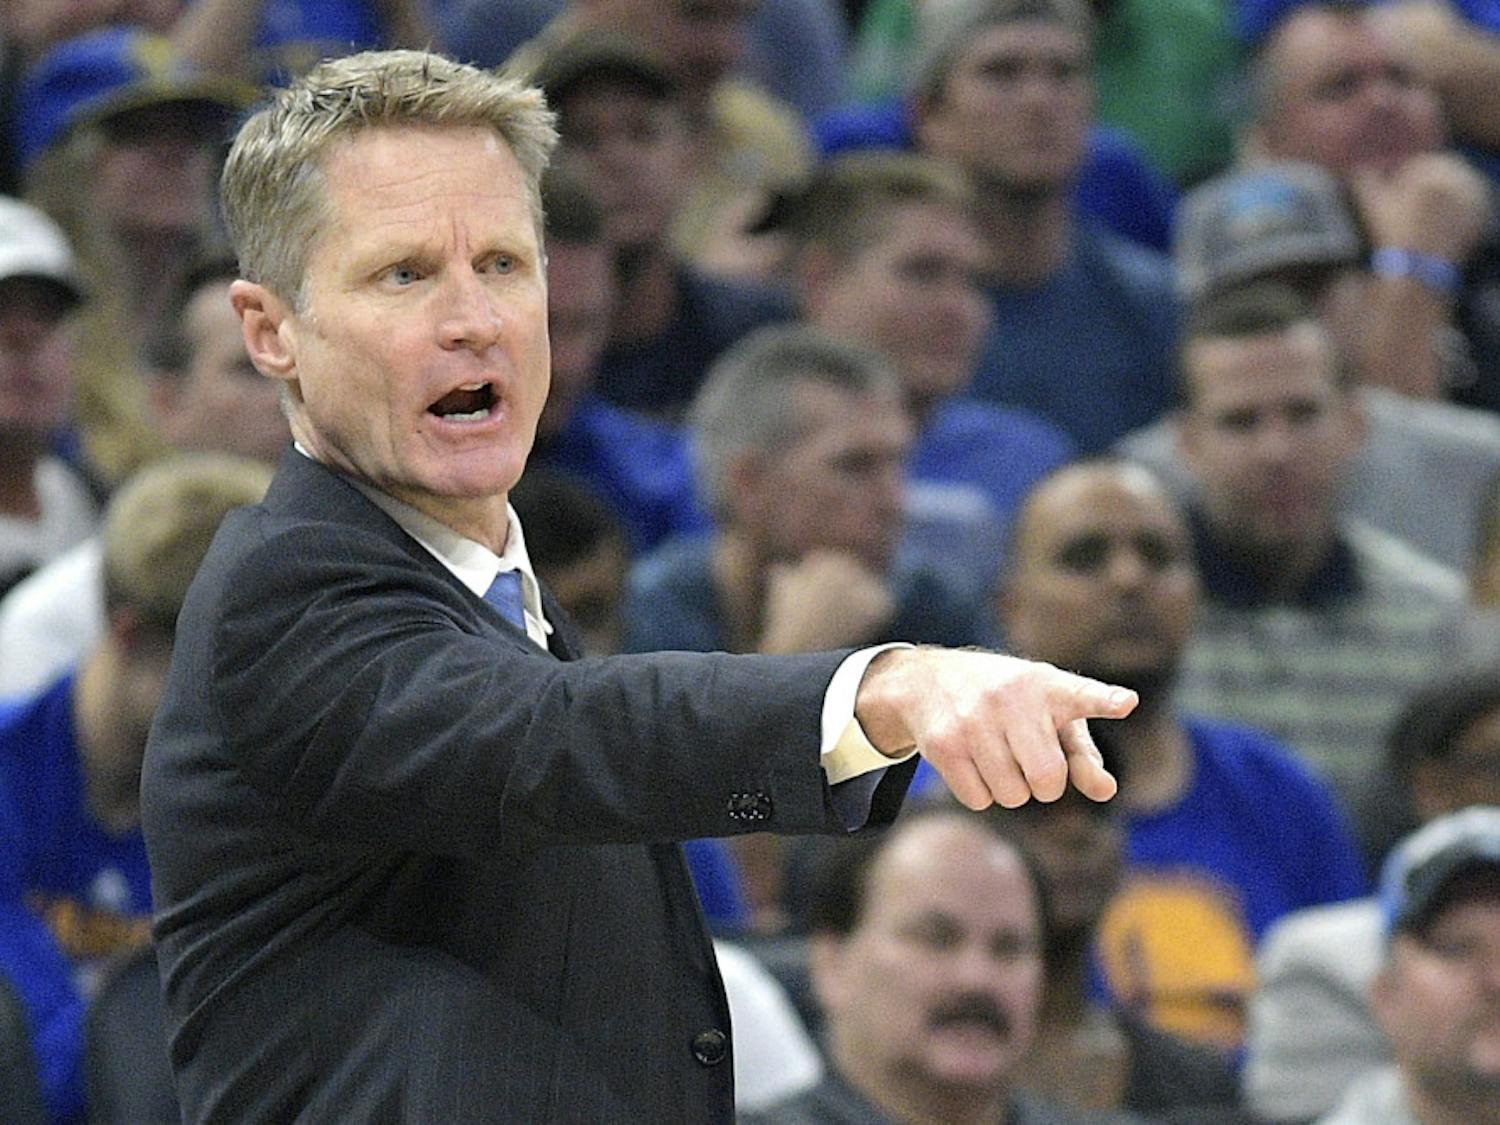 Golden State Warriors head coach Steve Kerr calls out instructions during the first half of an NBA basketball game against the Orlando Magic in Orlando, Fla., Sunday, Jan. 22, 2017. (AP Photo/Phelan M. Ebenhack)